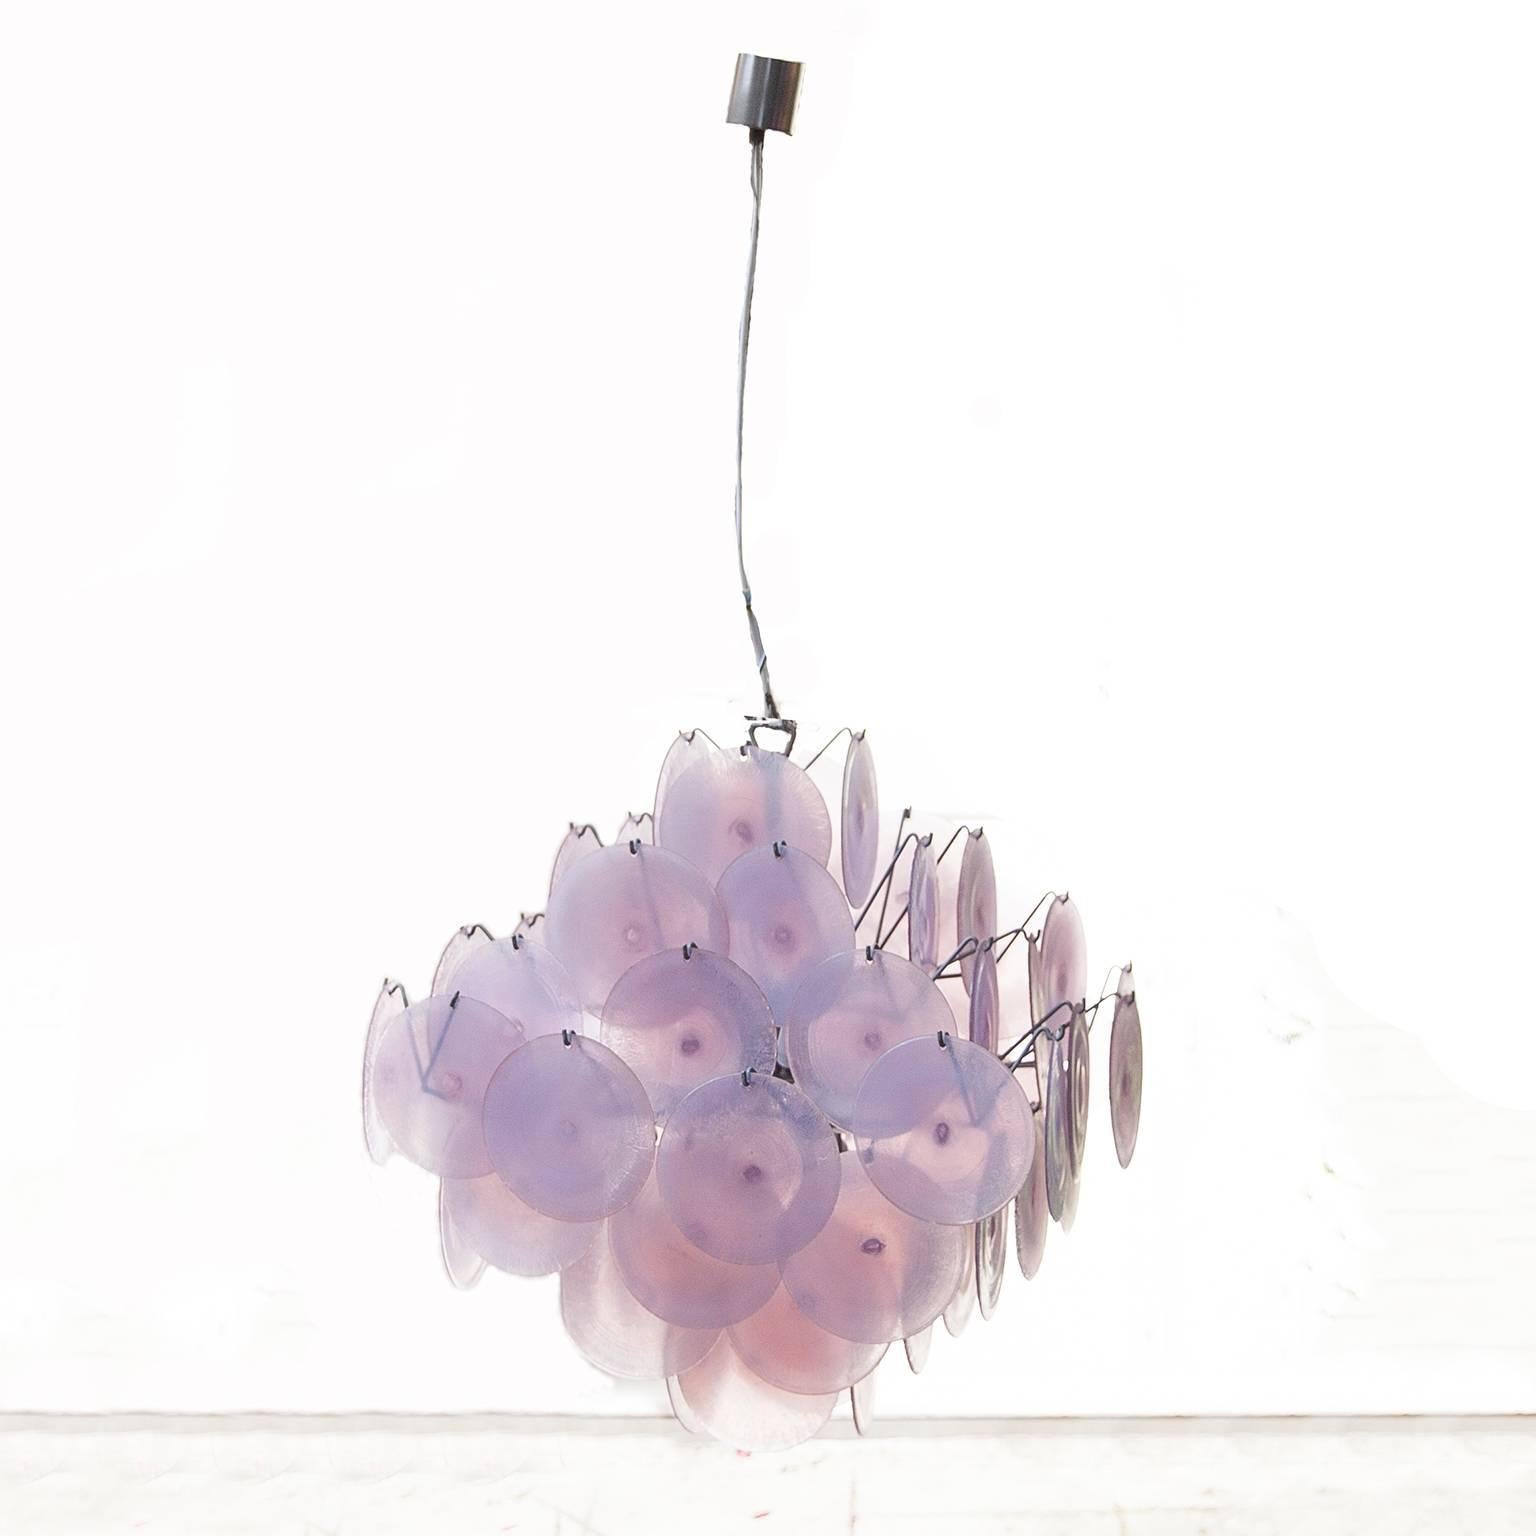 Huge original Murano glass chandelier by Carlo Nason for Mazzega.
The chandelier is compost of 64 Murano opaline glass discs which color is like a rainbow while illuminating
Measure: H 65 (110 with cable) x B 60 cm.